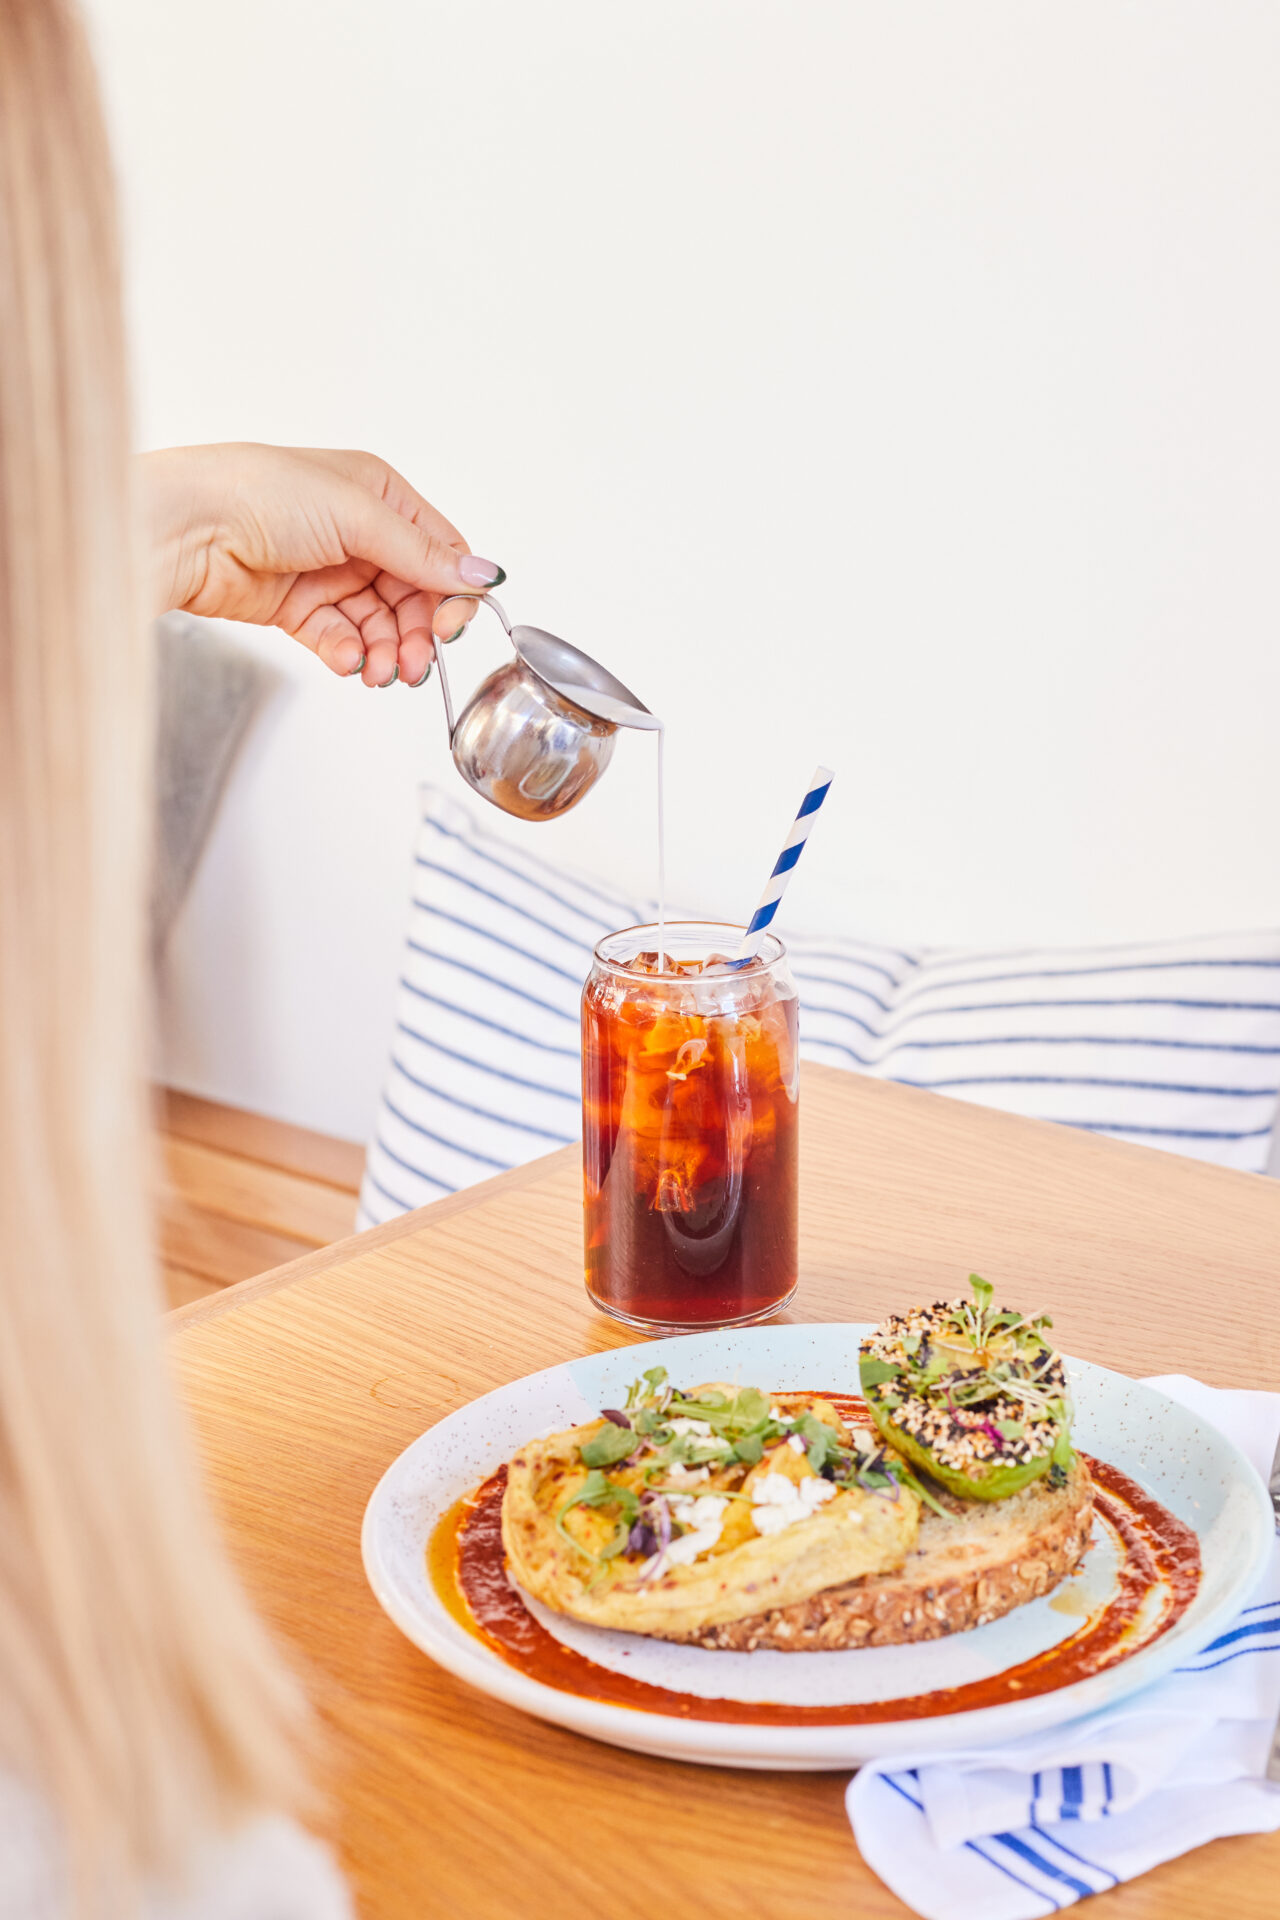 A women pours milk into a cold brew with a plate of scrambled egg and toast on the table.